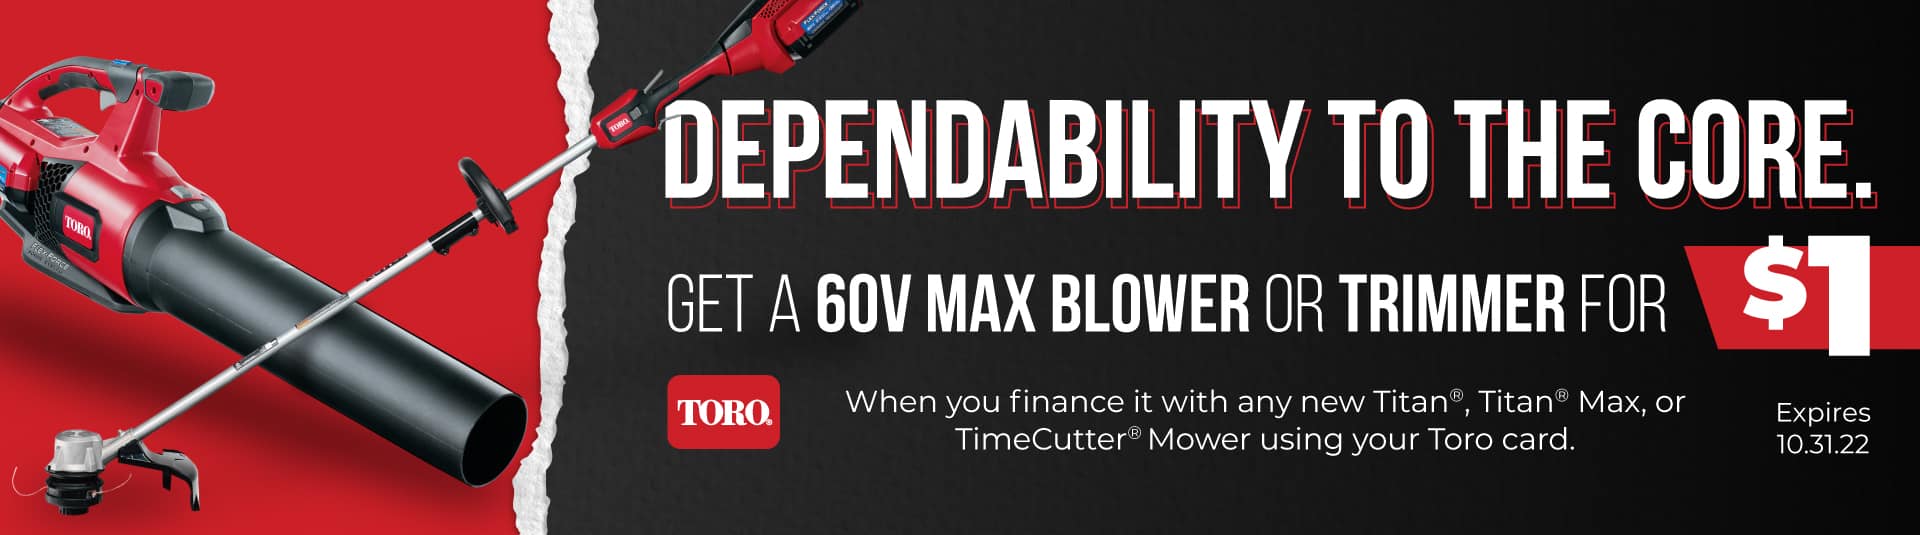 Get a blower or trimmer for just $1 when you finance a Toro Titan or TimeCutter.